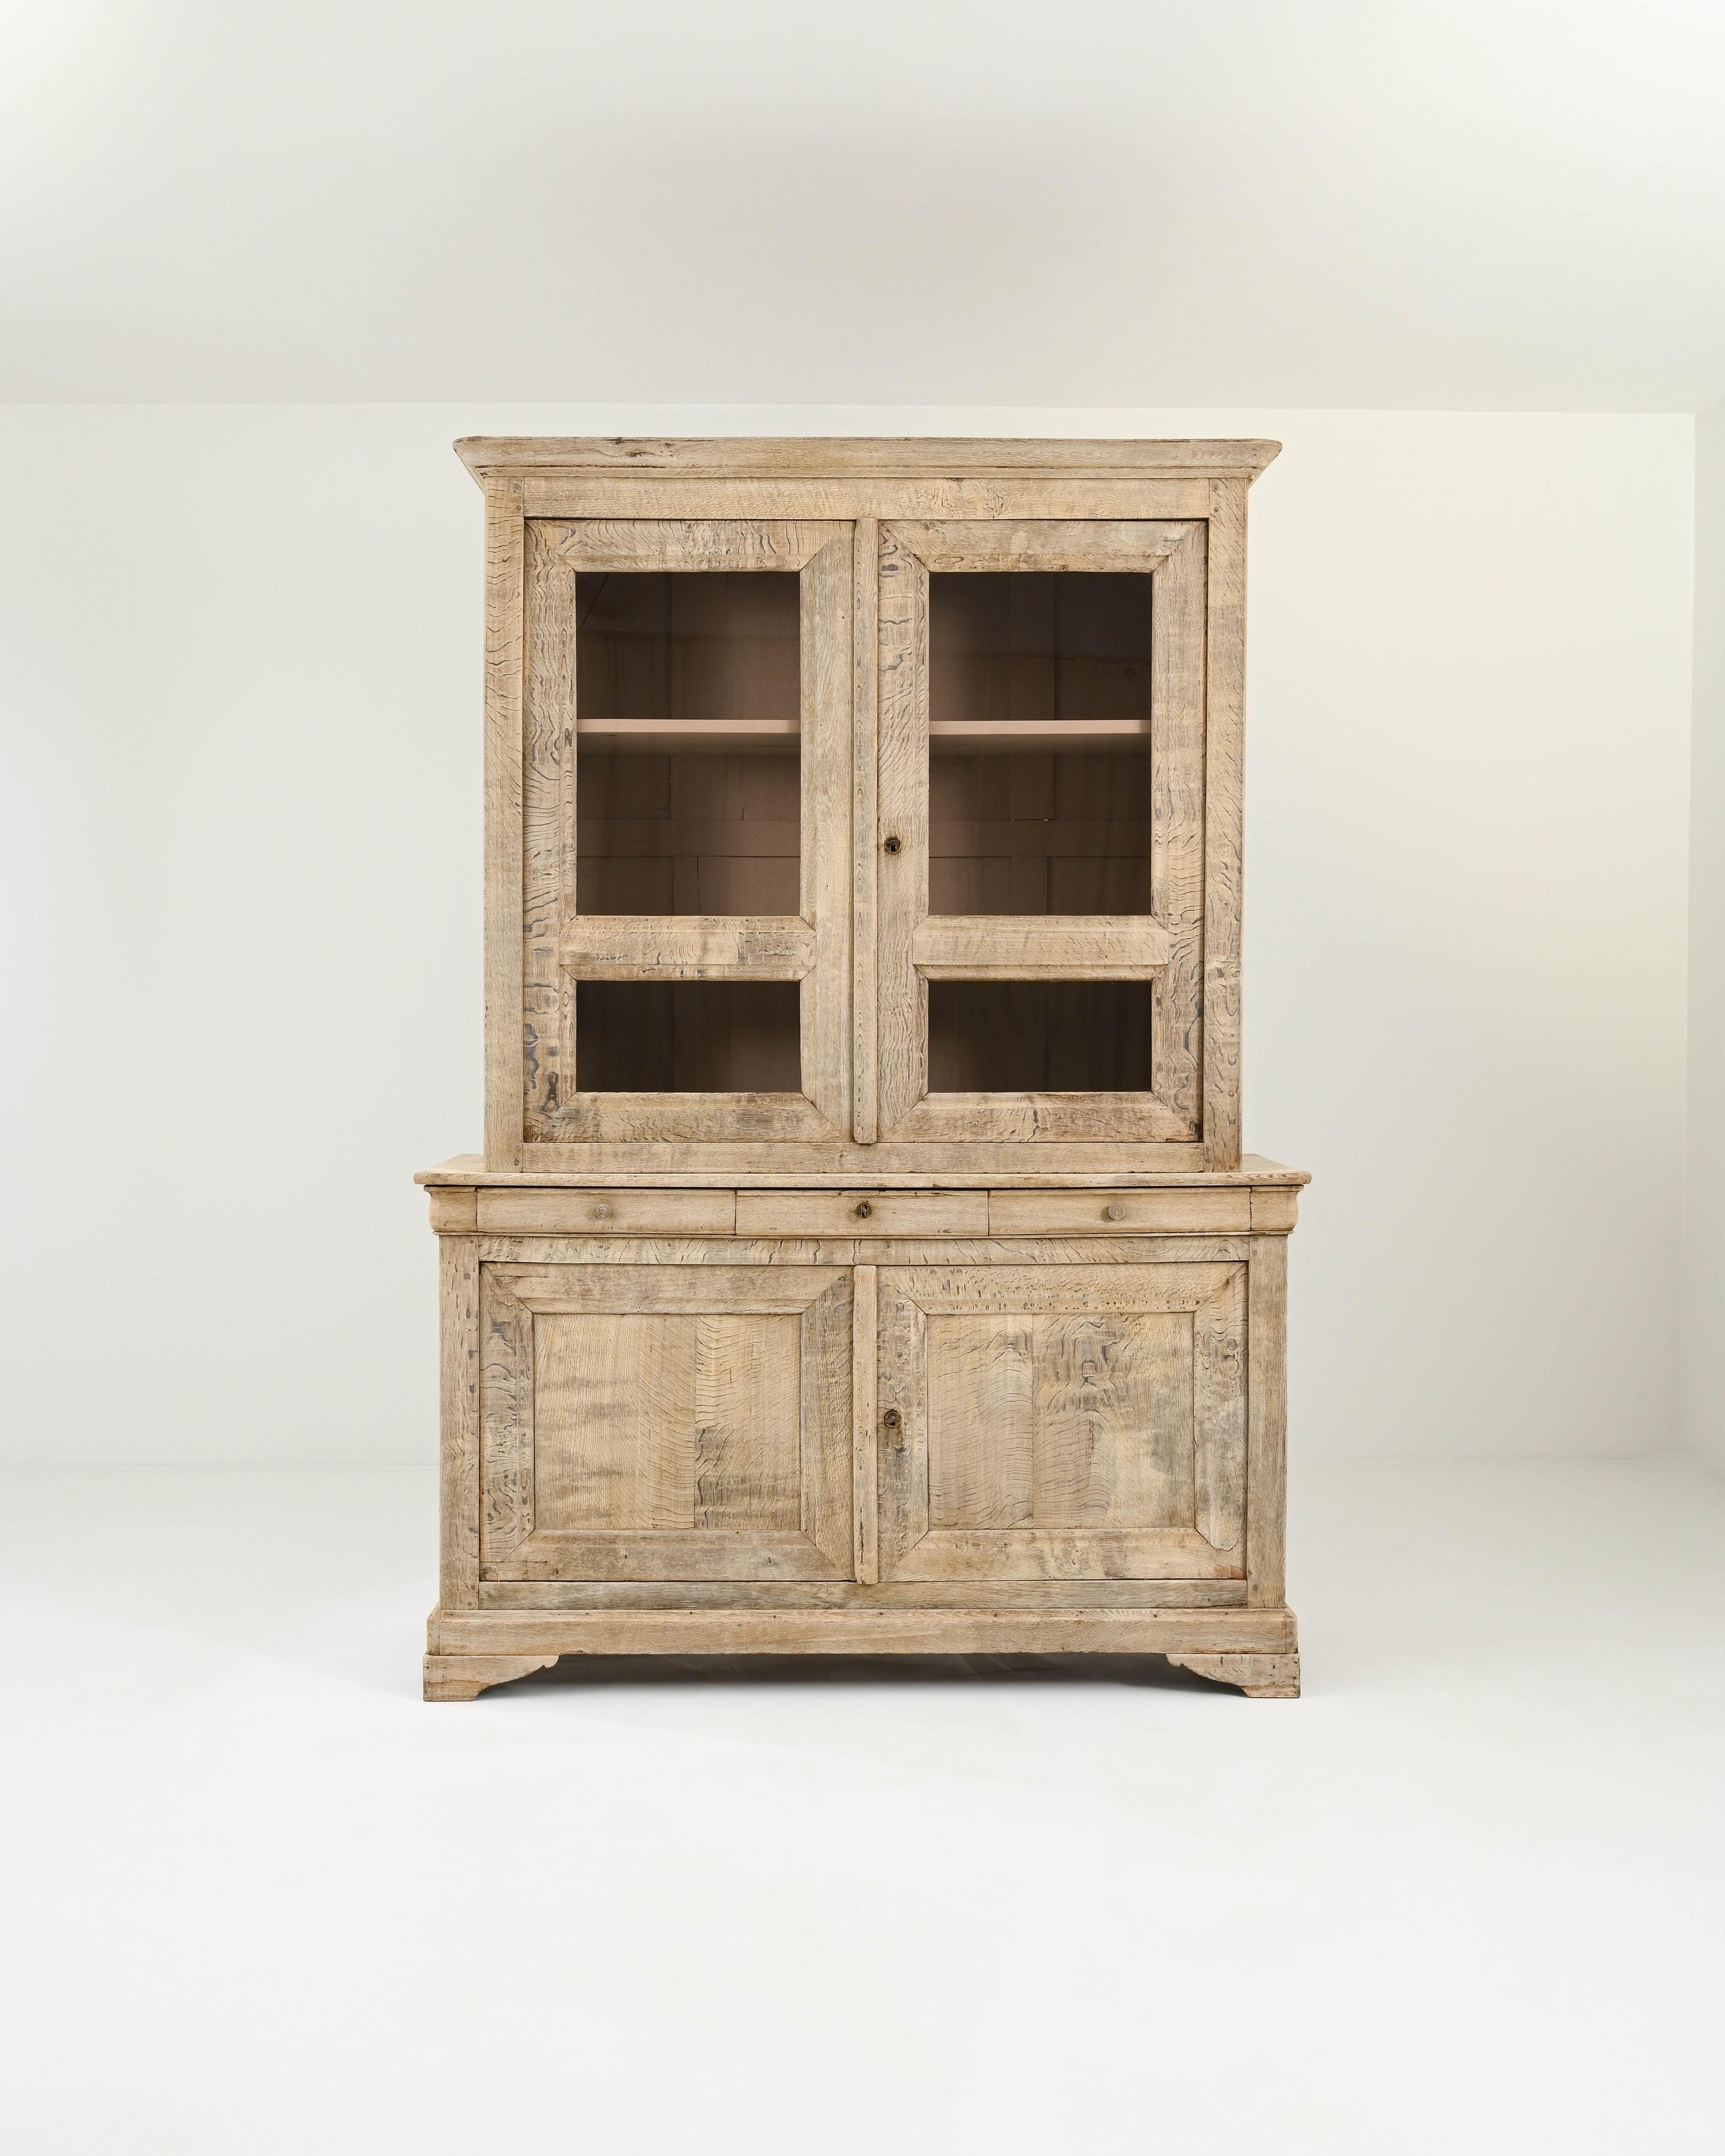 Tiger stripe-like flashes of wood grain that dart across the surface of this characteristic oak vitrine created in 19th century France. Impressive in stature, this display cabinet combines a rustic familiarity with elite craftsmanship and impeccable